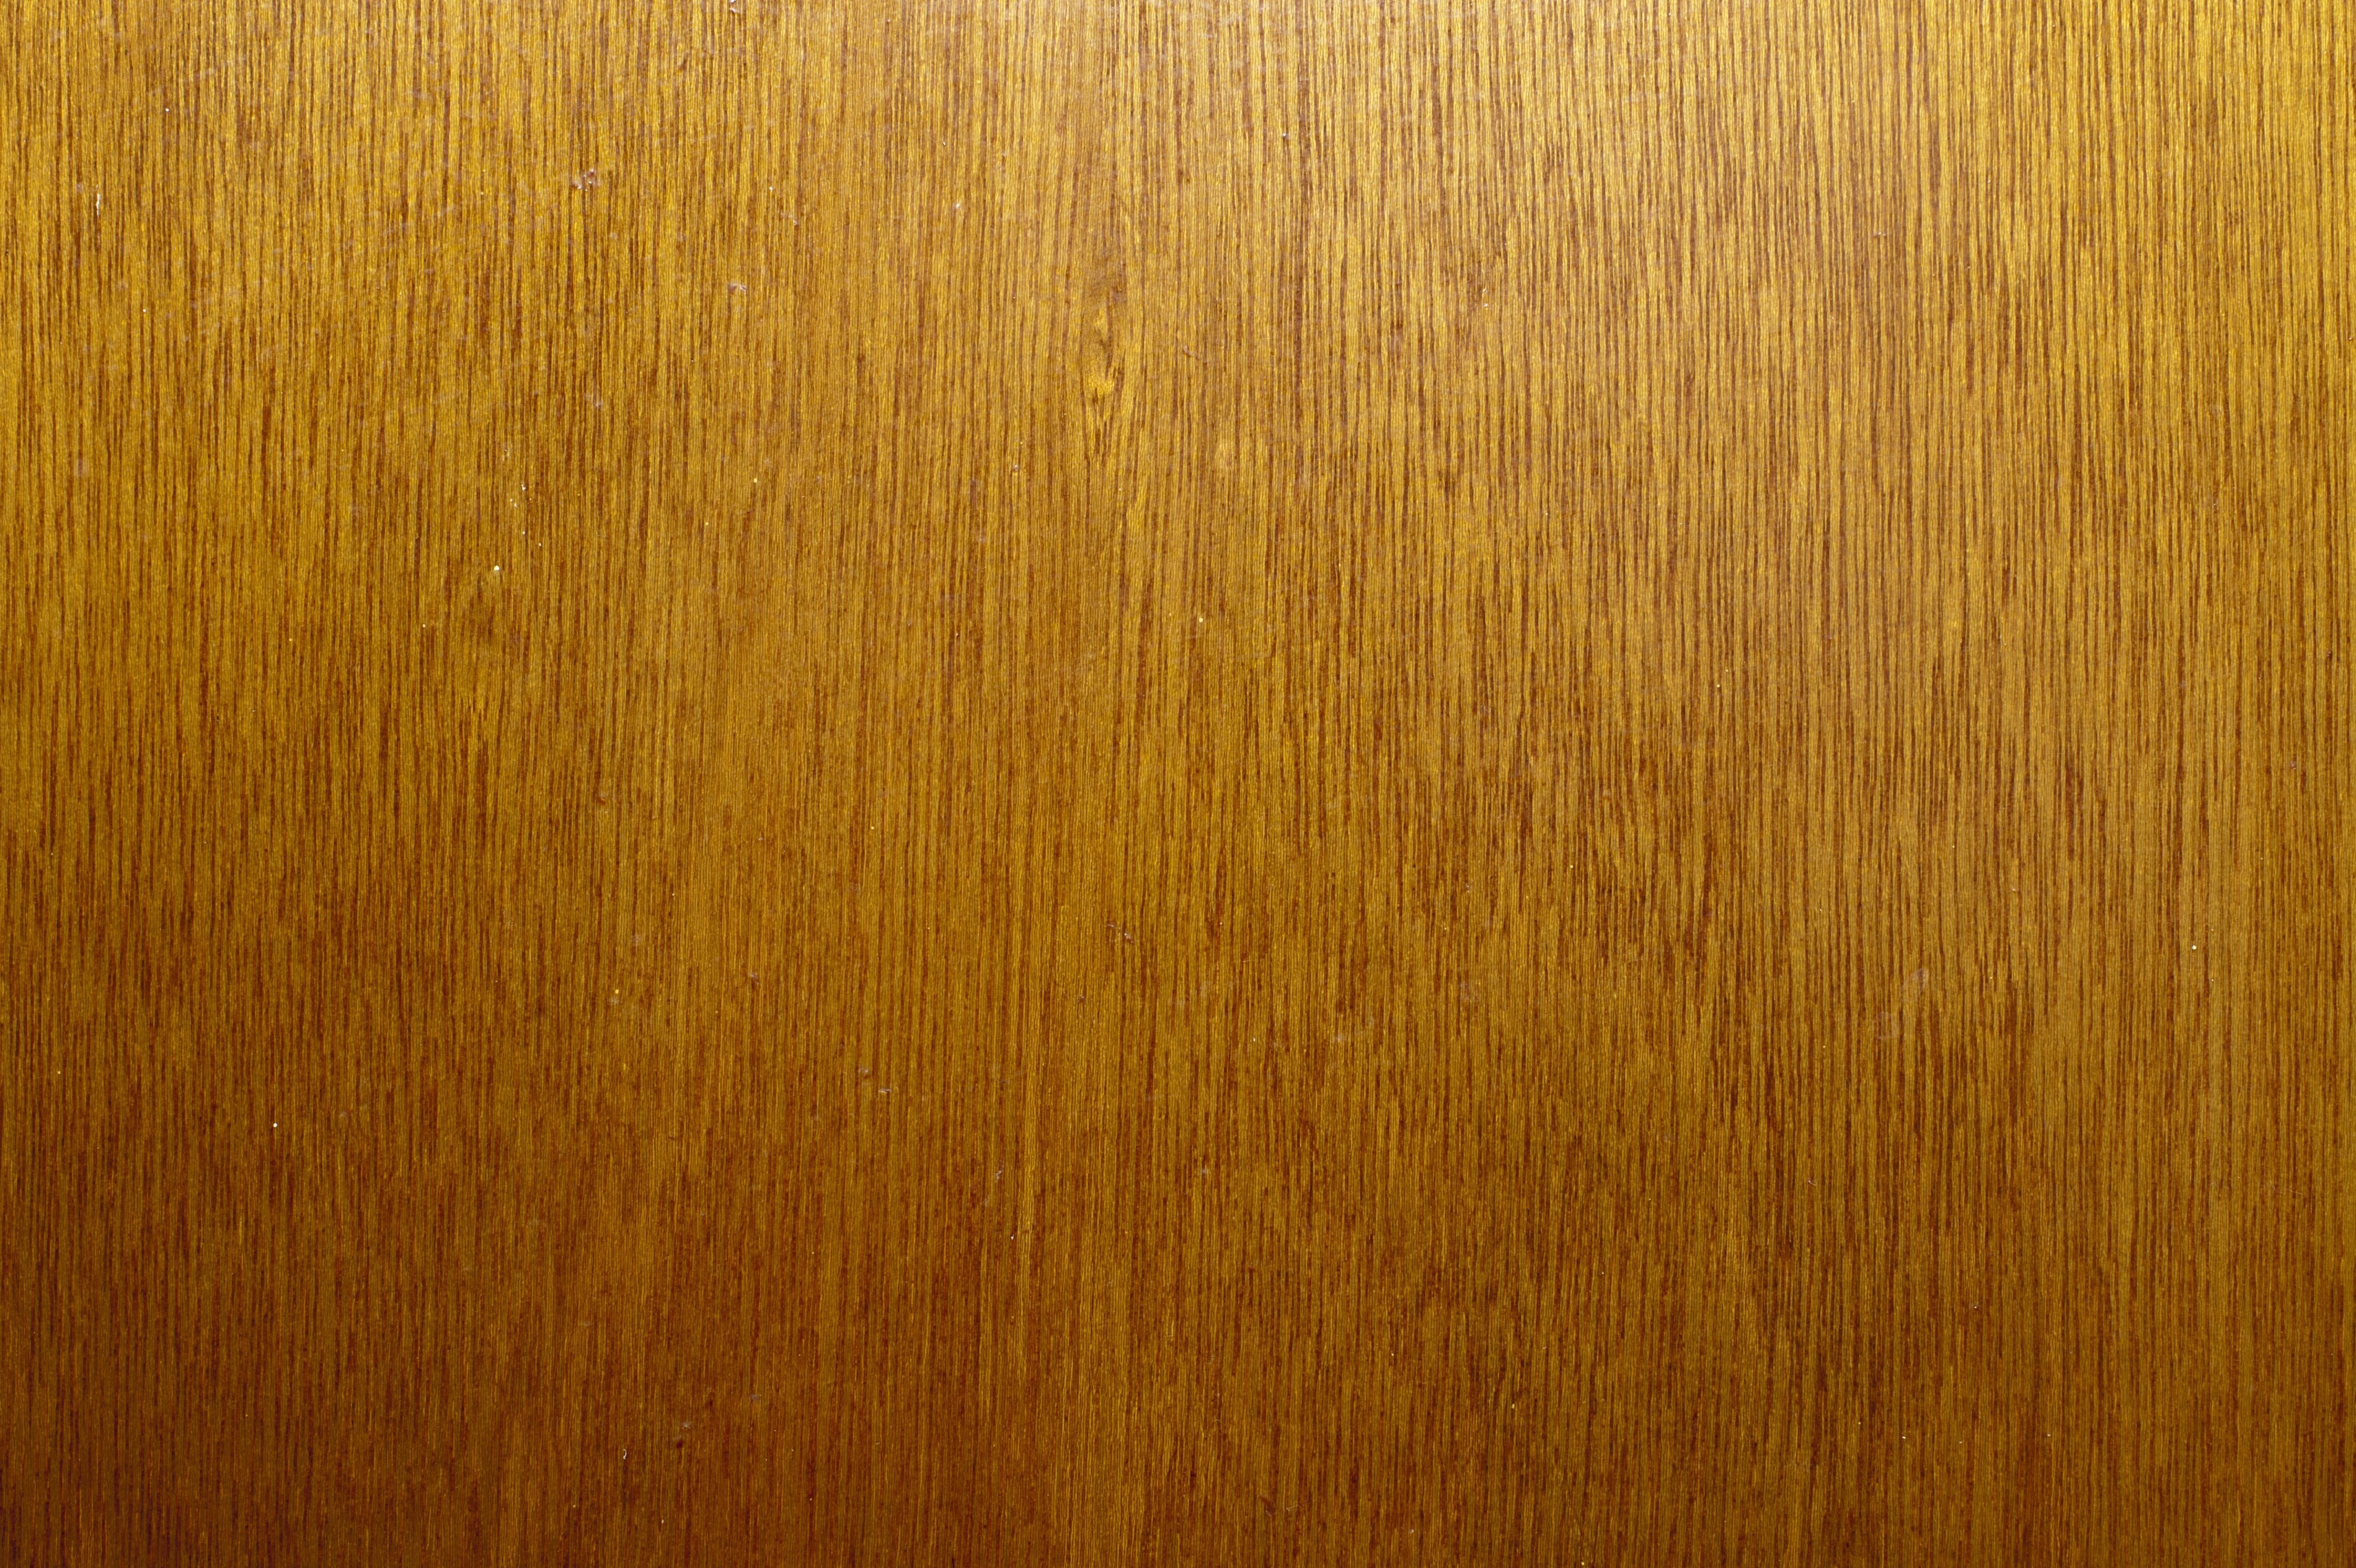 Mahogany Wood Grain Background And Textures Cr103